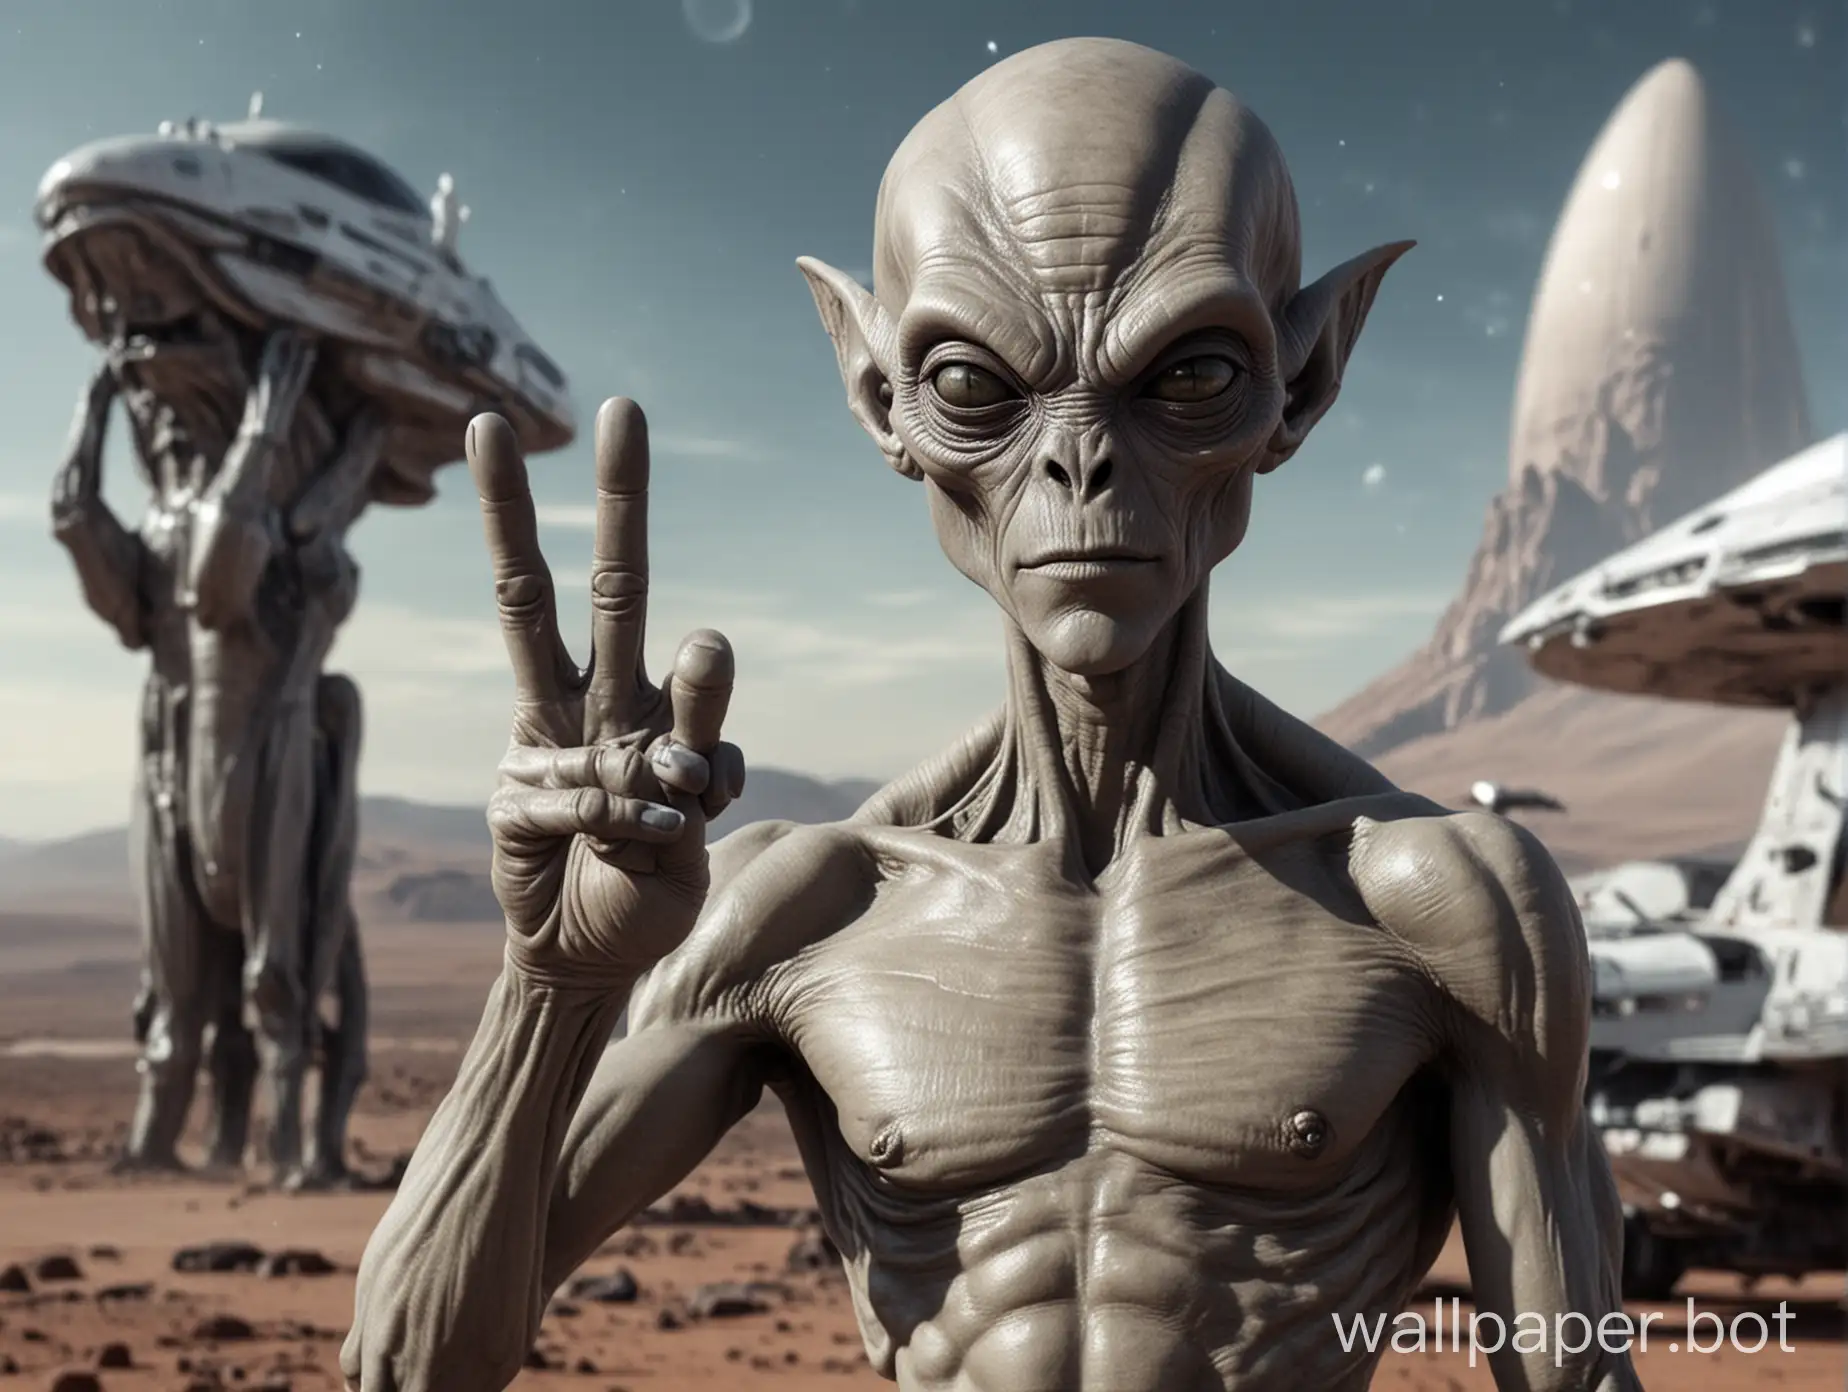 gray alien shows middle finger. full size. spaceship in the background